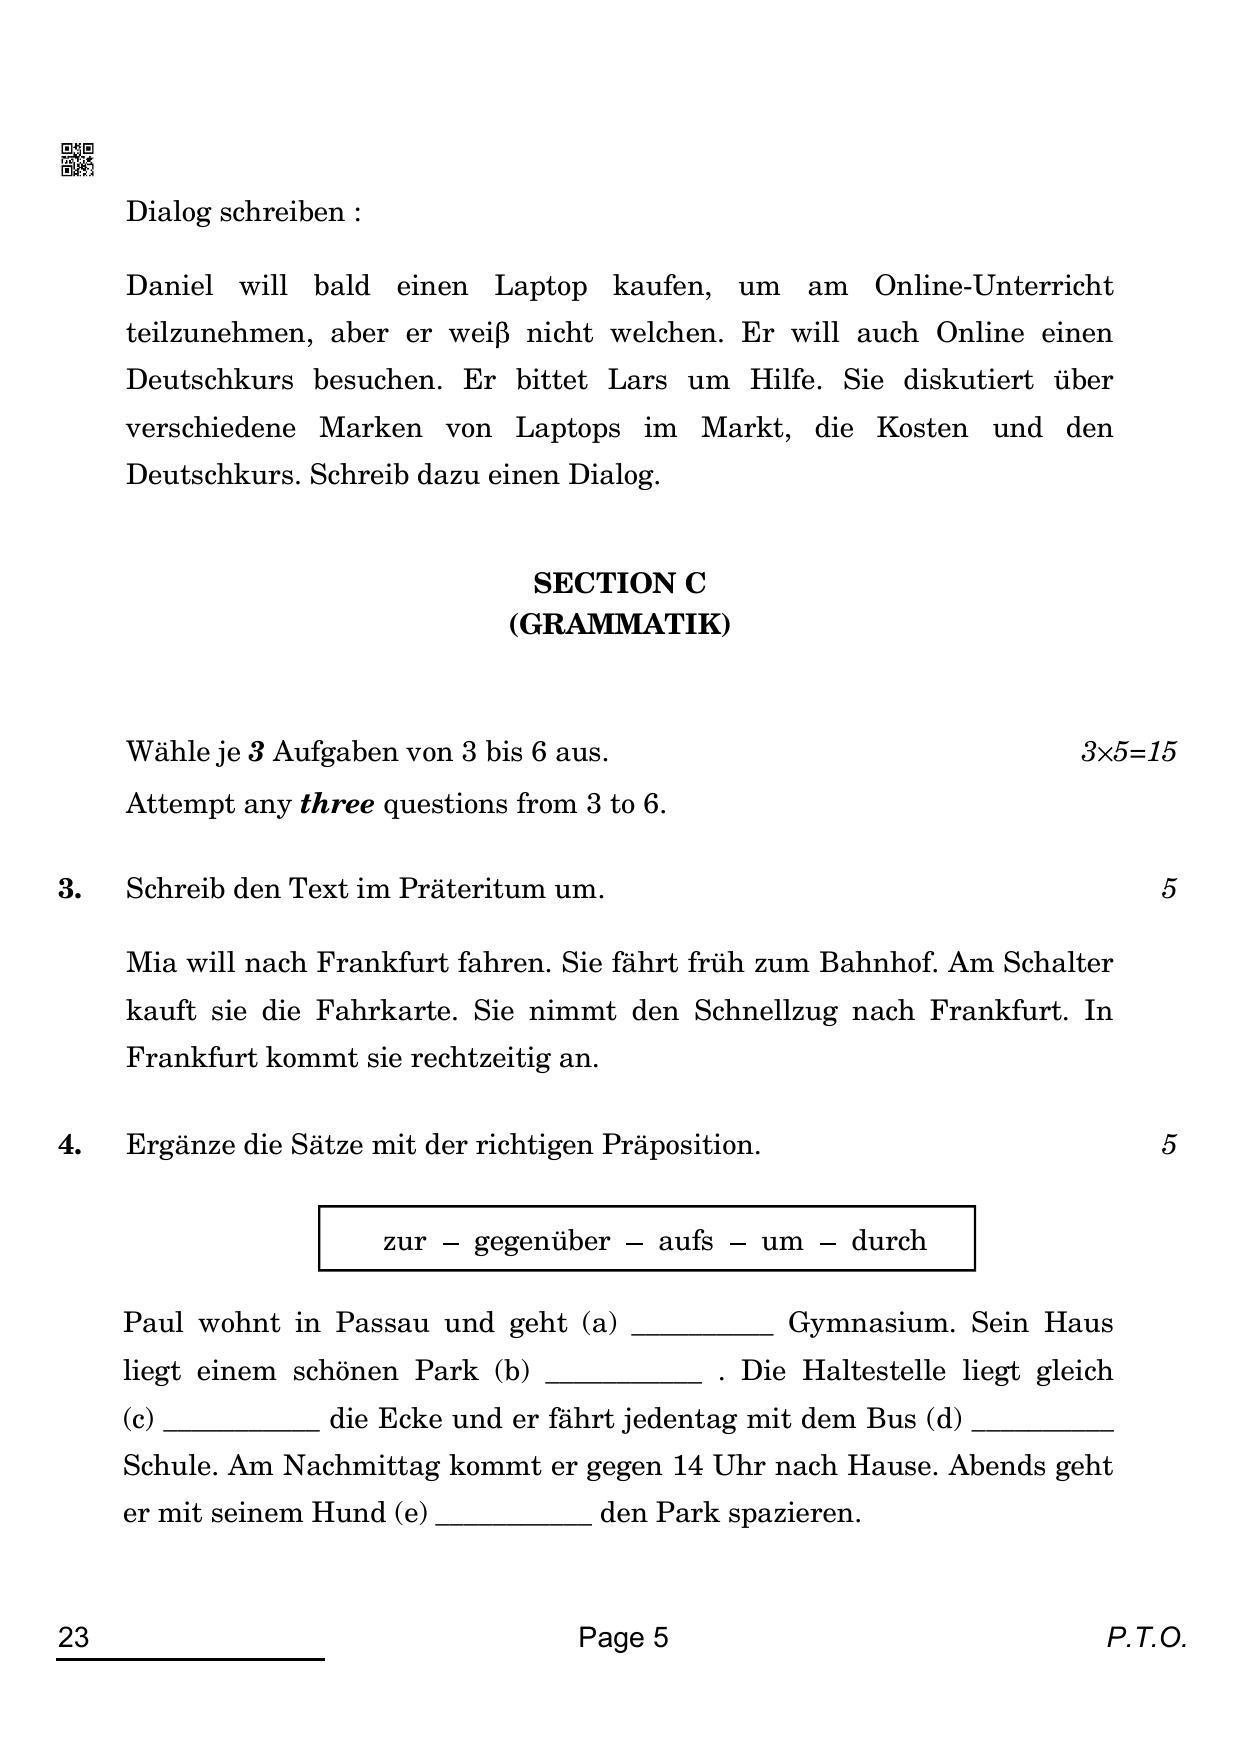 CBSE Class 10 23_German 2022 Question Paper - Page 5